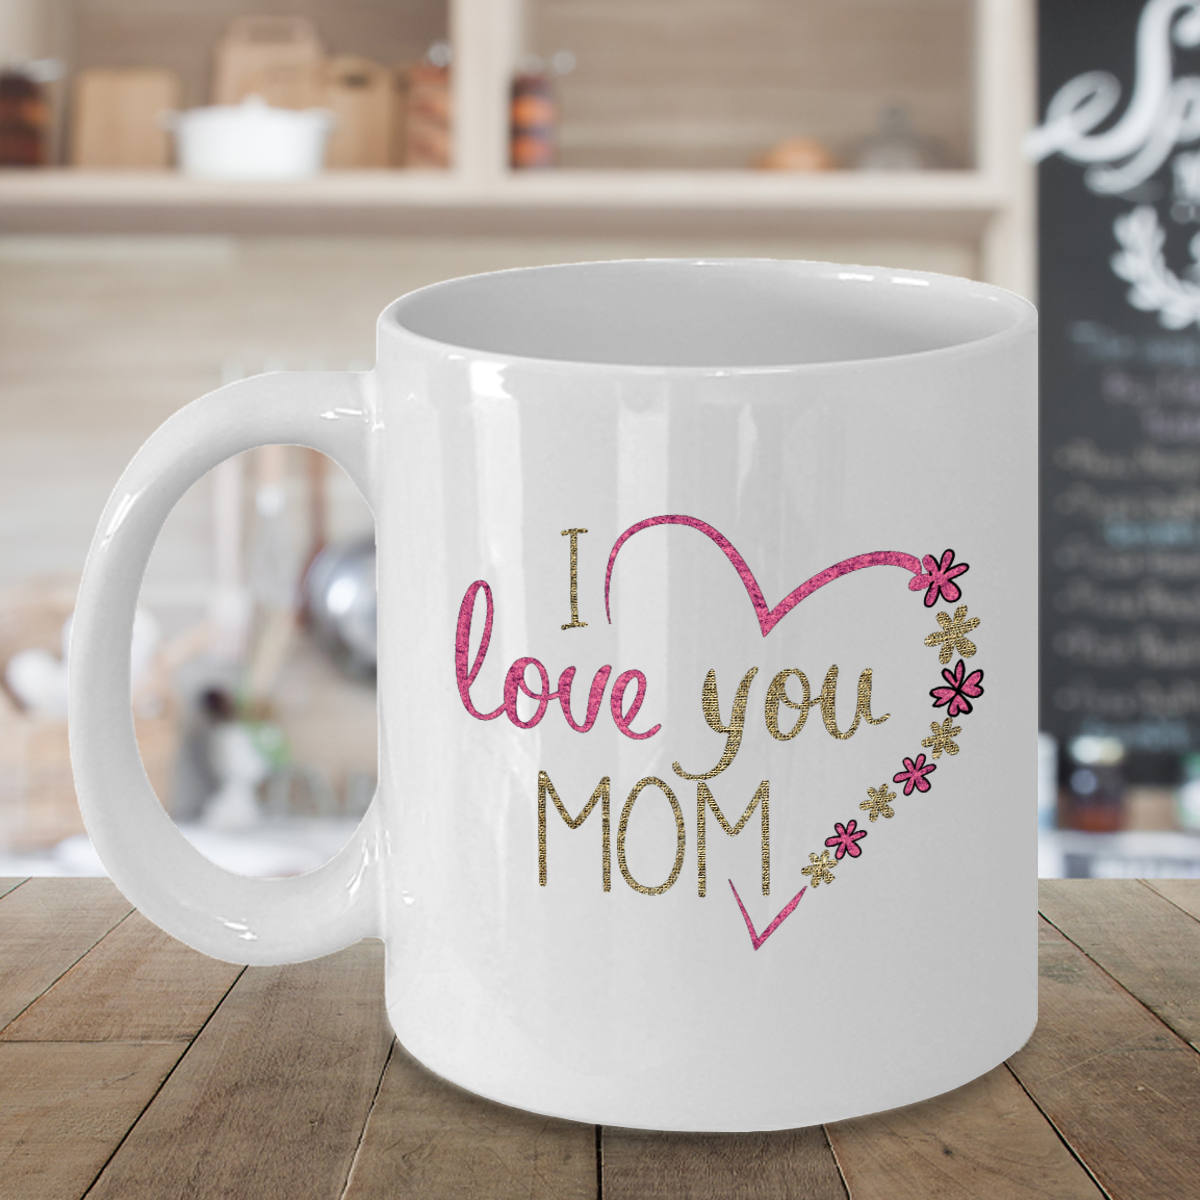 http://trendygearshop.com/wp-content/uploads/2019/12/happy-mothers-day-to-best-mom-ever-with-mothers-day-mug-gift-for-mom-from-daughter-or-from-son-gift-for-her-as-coffee-mug-is-1-mom-gift-5e078954.jpg